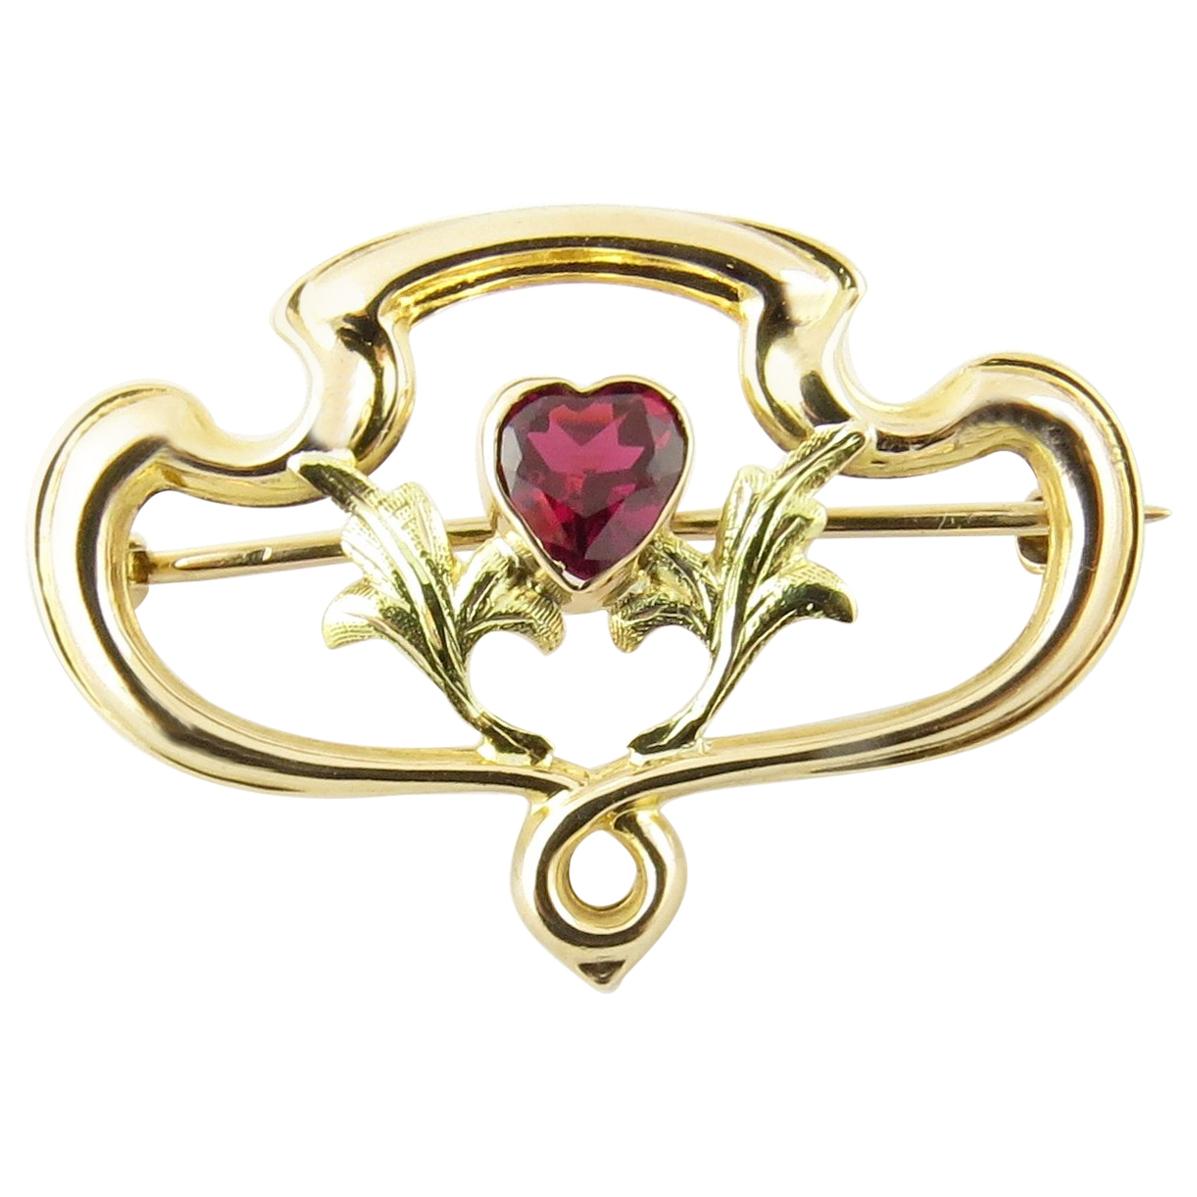 Vintage 10 Karat Yellow Gold and Synthetic Ruby Brooch or Pin #4353